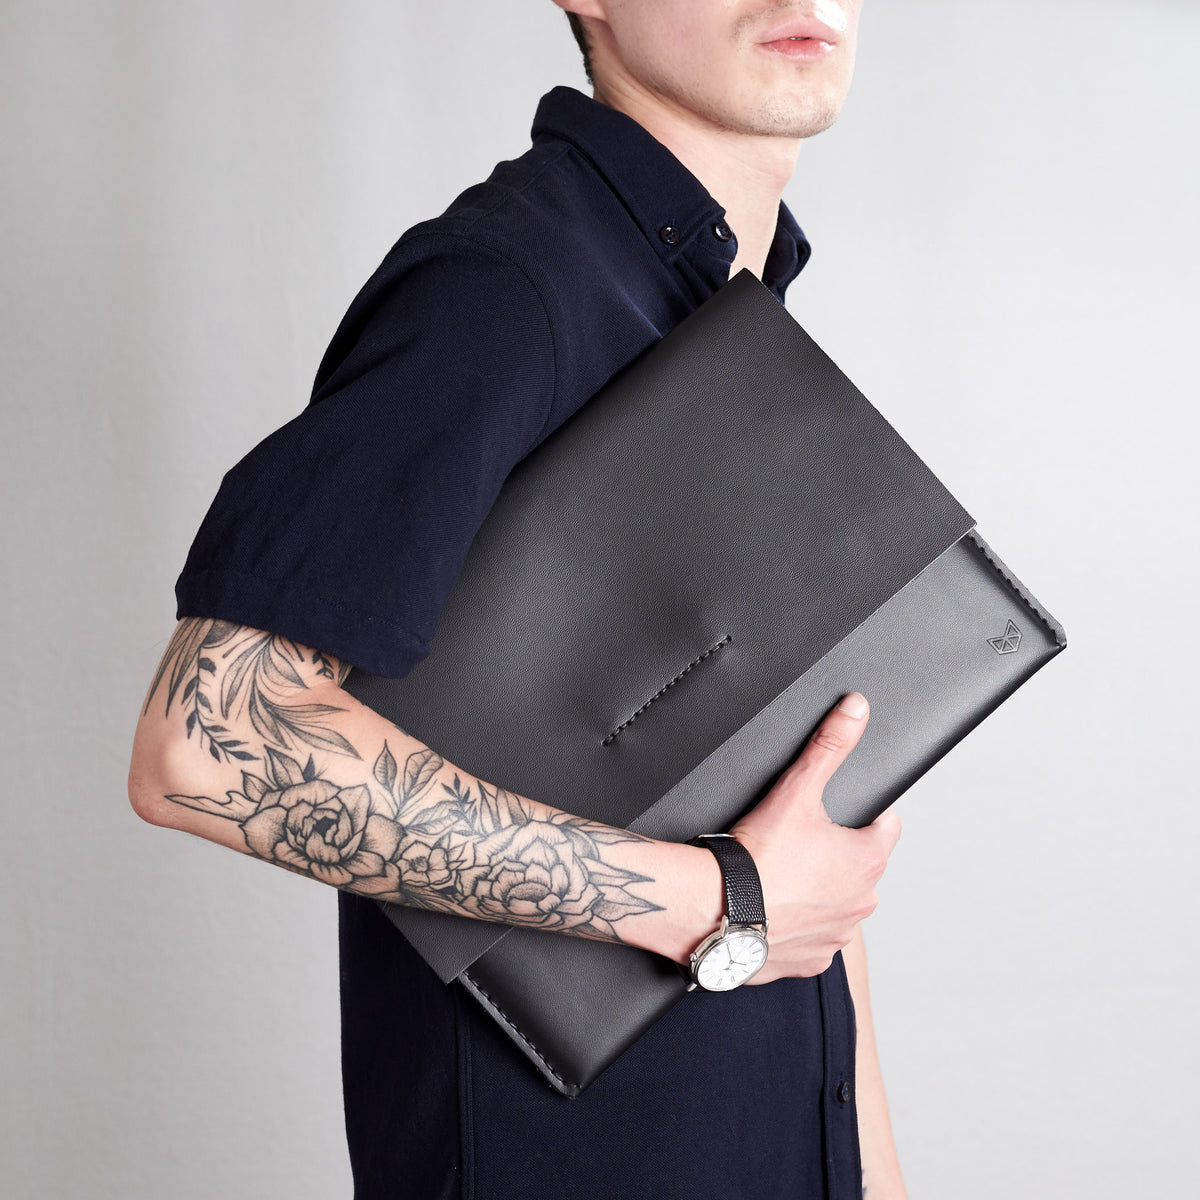 Style front view. Black draftsman 1 case by Capra Leather. ZenBook sleeve.